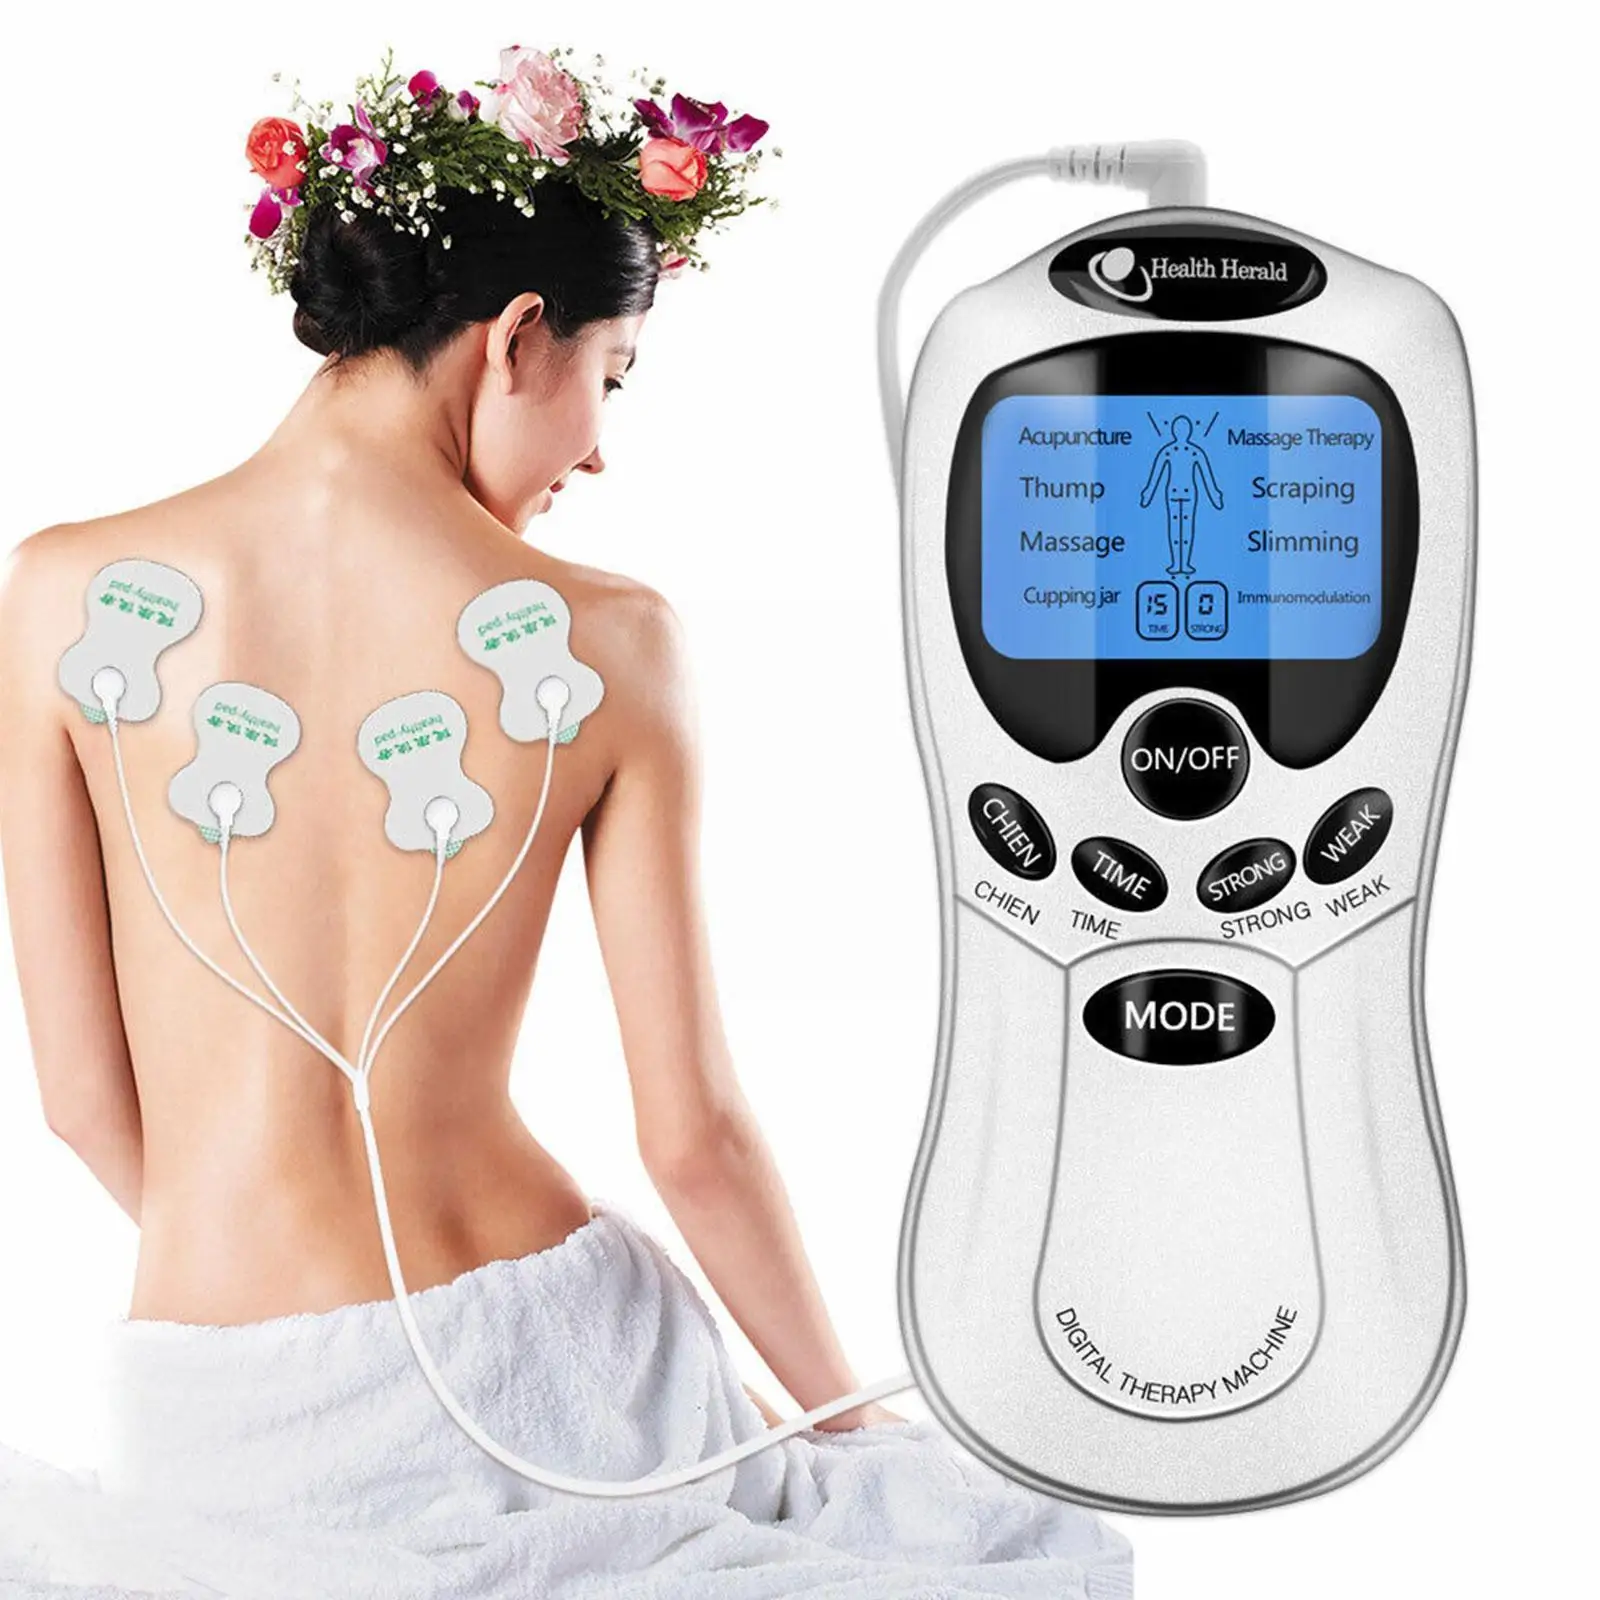 

EMS TENS Unit Health Herald Digital Therapy Machine EMS Relief Unit Acupuncture Fitness Health Pain Meridians TENS Herald I4R2